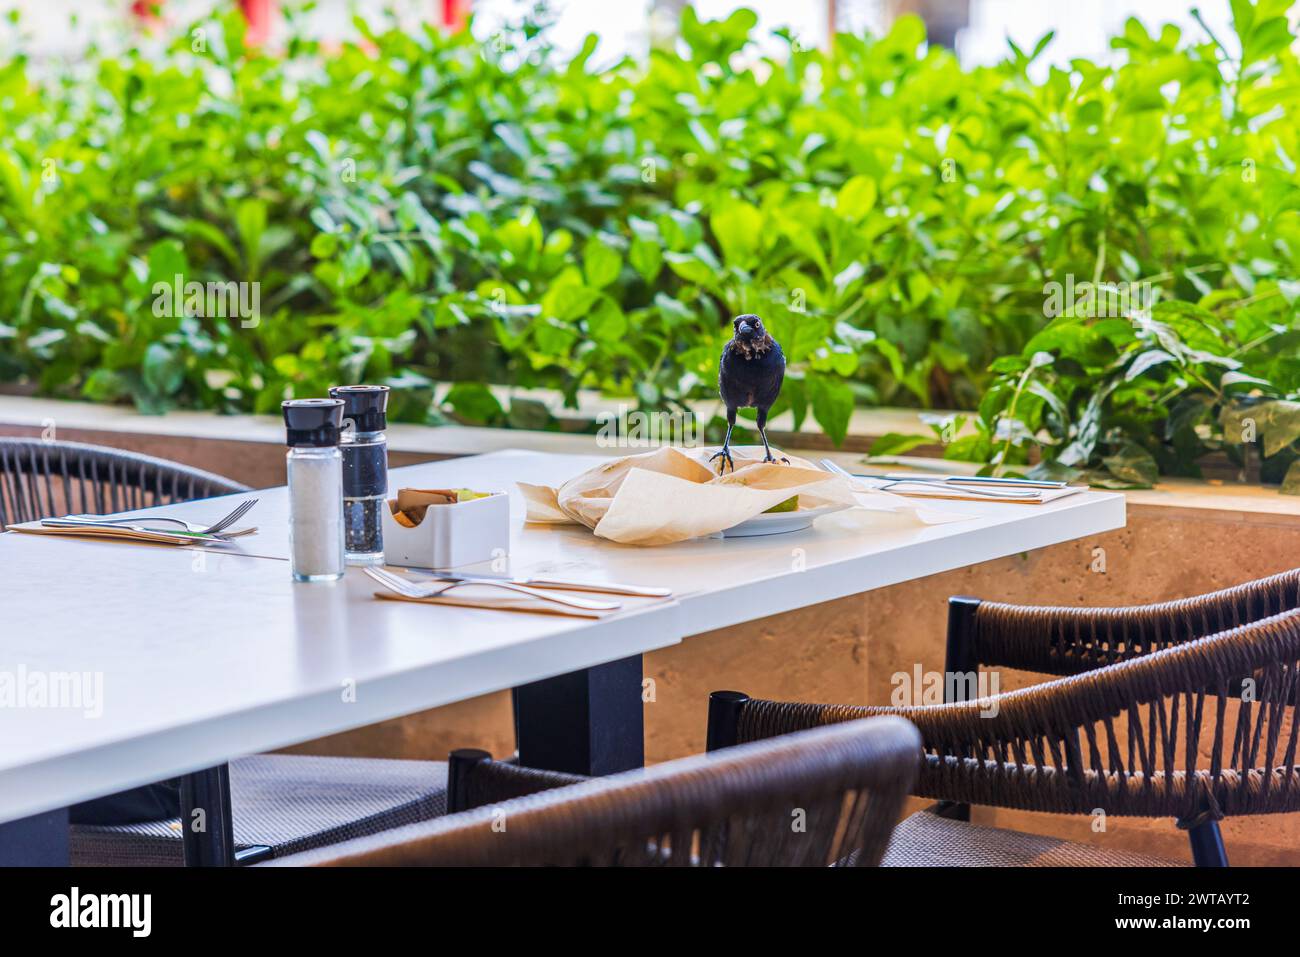 View of a tropical bird sitting on a table in a restaurant amid remnants of food and dirty dishes. Curacao. Stock Photo